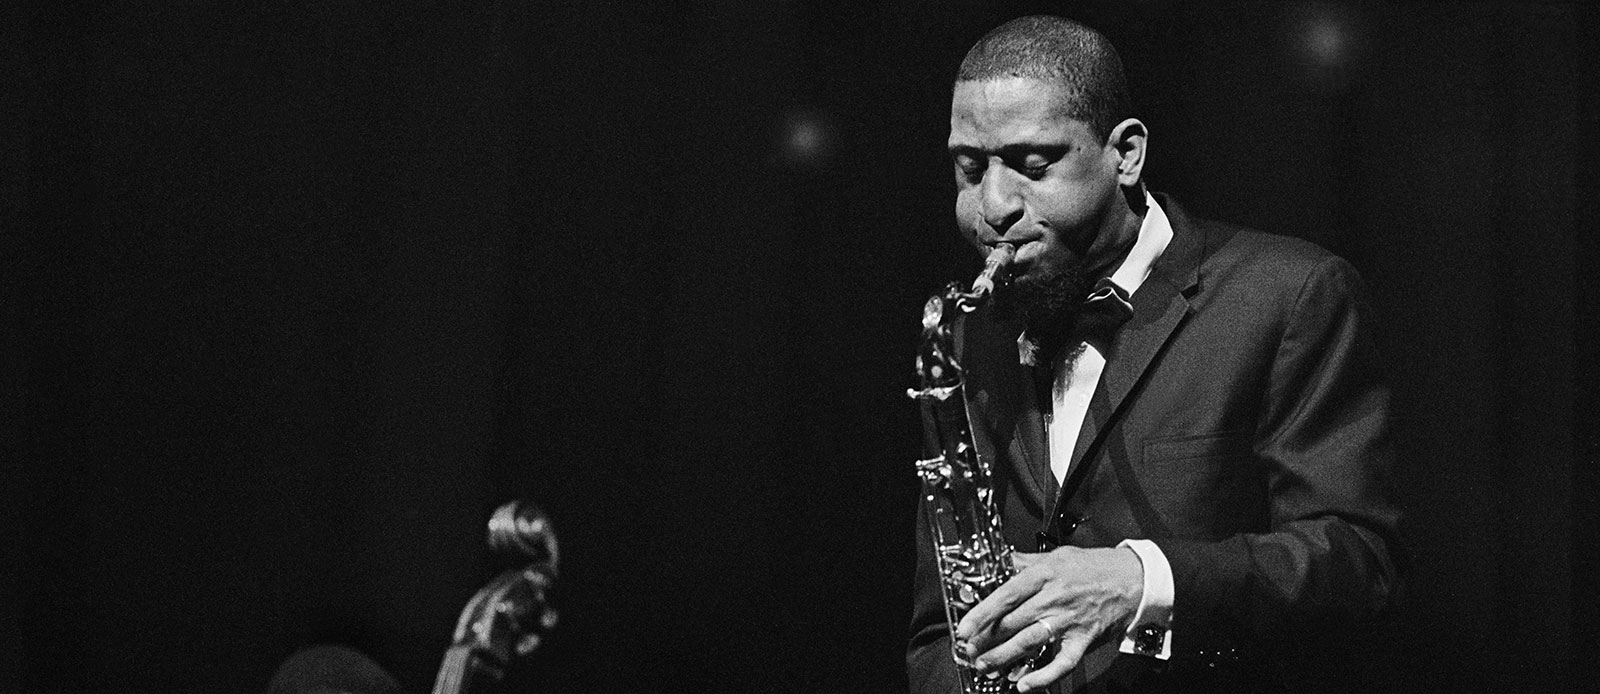 Saxophone Colossus: the life and music of Sonny Rollins